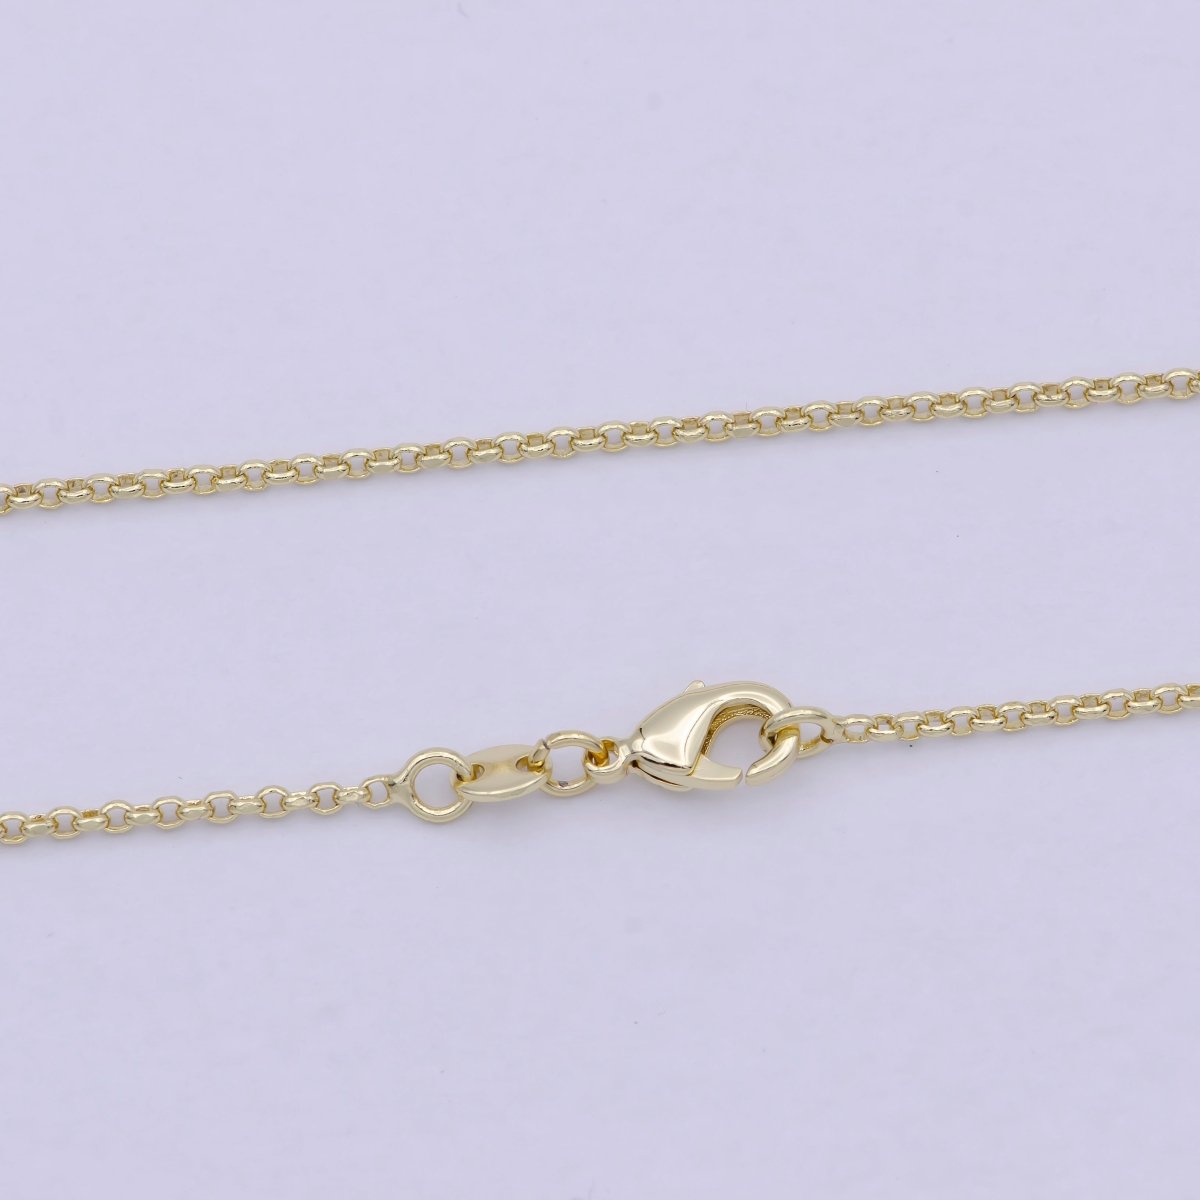 14K Gold Filled Rolo Chain Necklace, 17.7 Inch Rolo Chain Necklace, Dainty 1.4mm Link Necklace w/ Lobster Clasp | WA-812 Clearance Pricing - DLUXCA